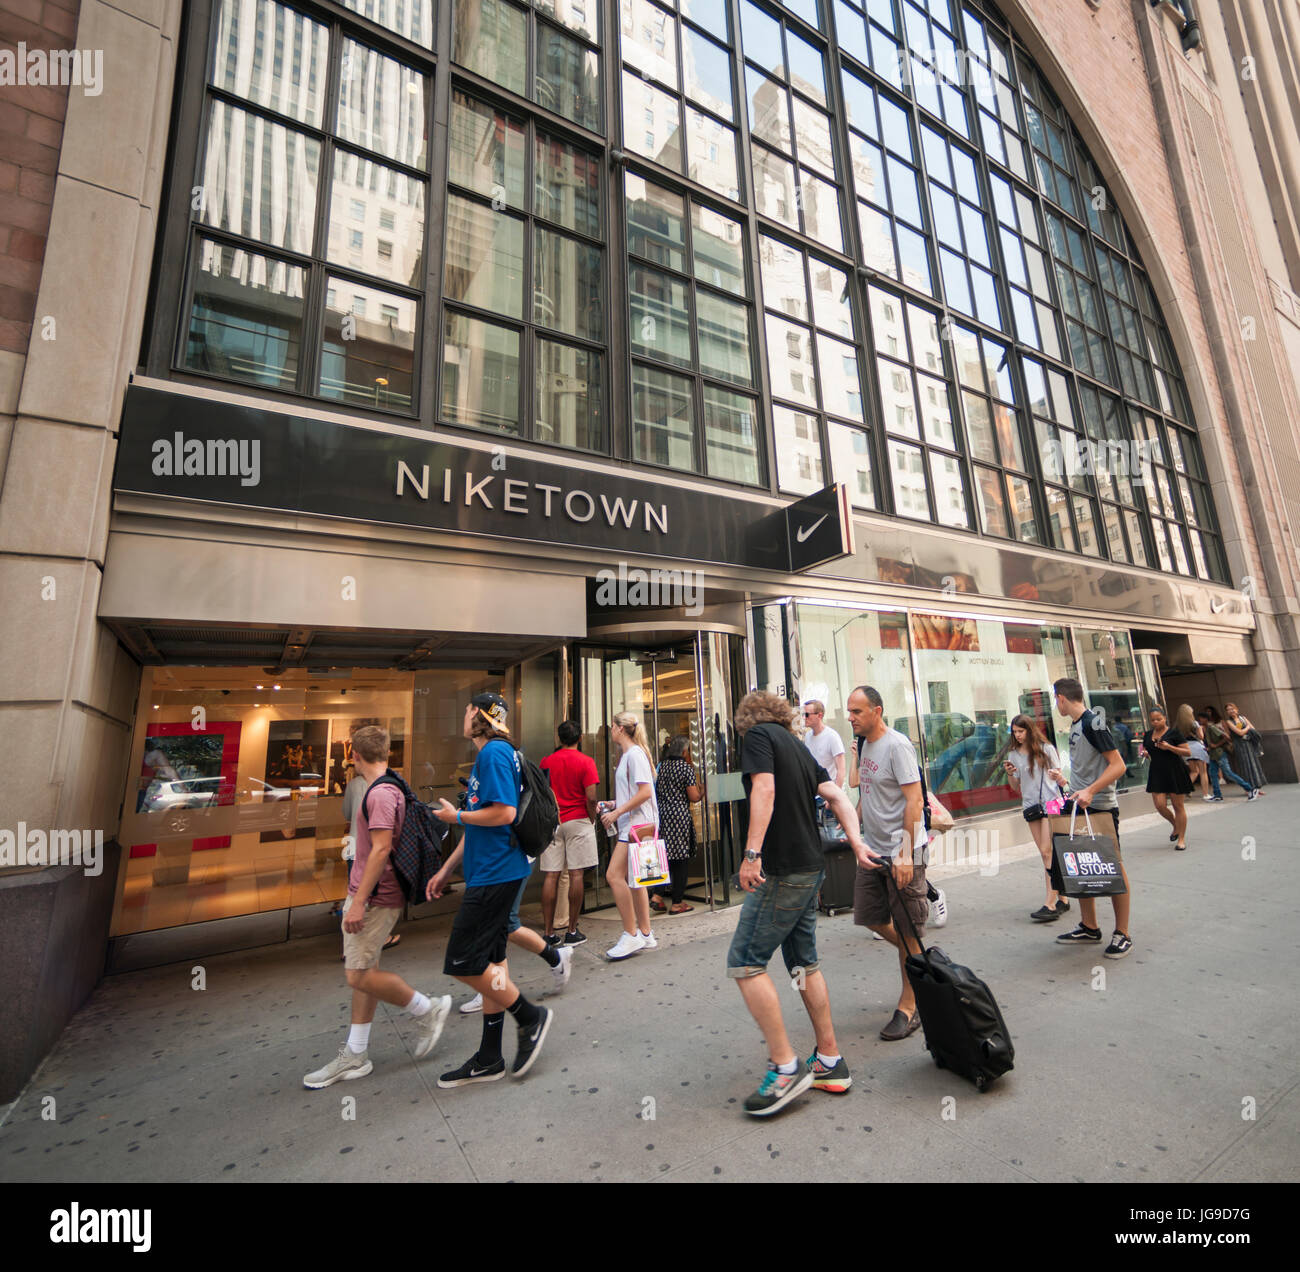 Niketown Nyc High Resolution Stock Photography and Images - Alamy